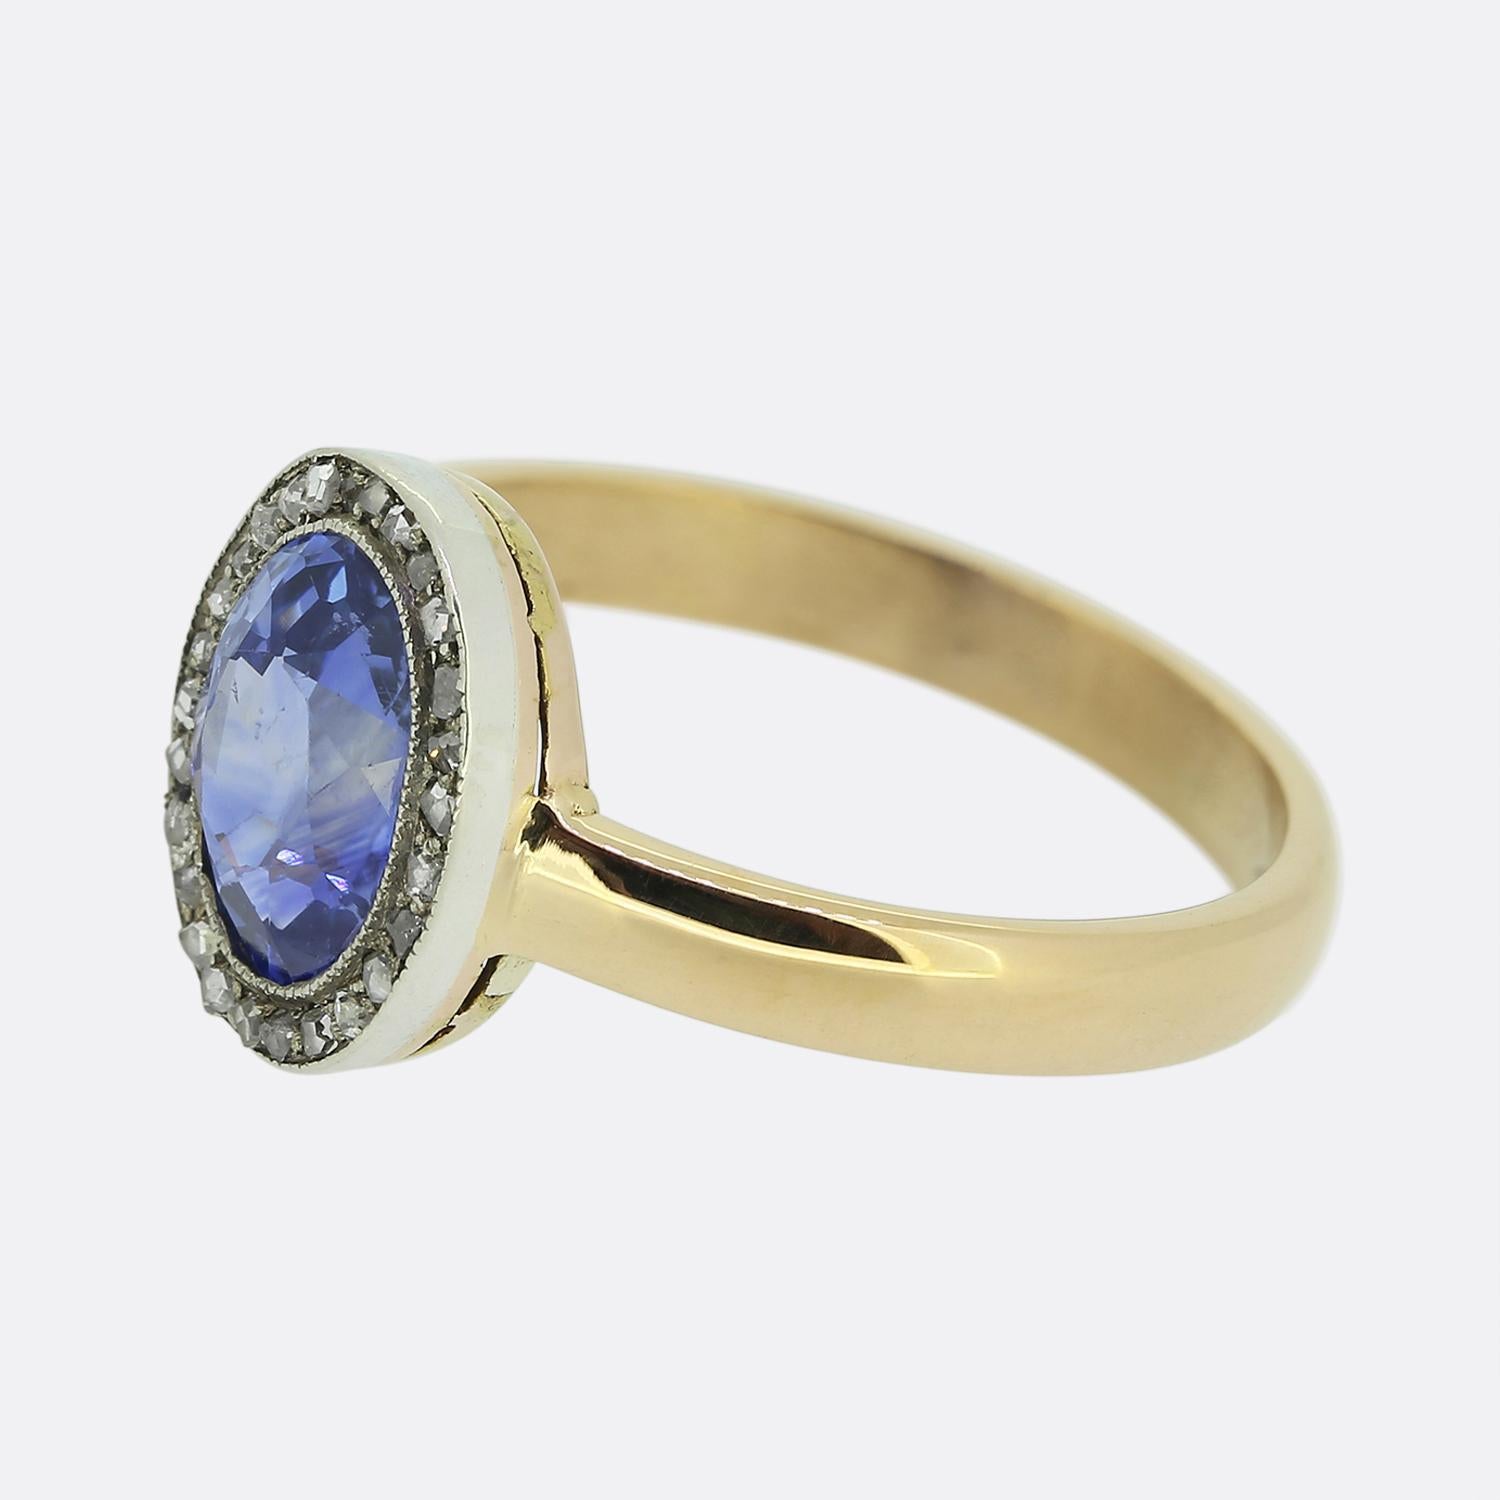 Here we have a charming sapphire and diamond cluster ring. An oval faceted sapphire of Ceylon origin boasts a highly desirable mid-blue colour tone which is complemented around the outer edge by a single row of rose cut diamonds. Each stone here has